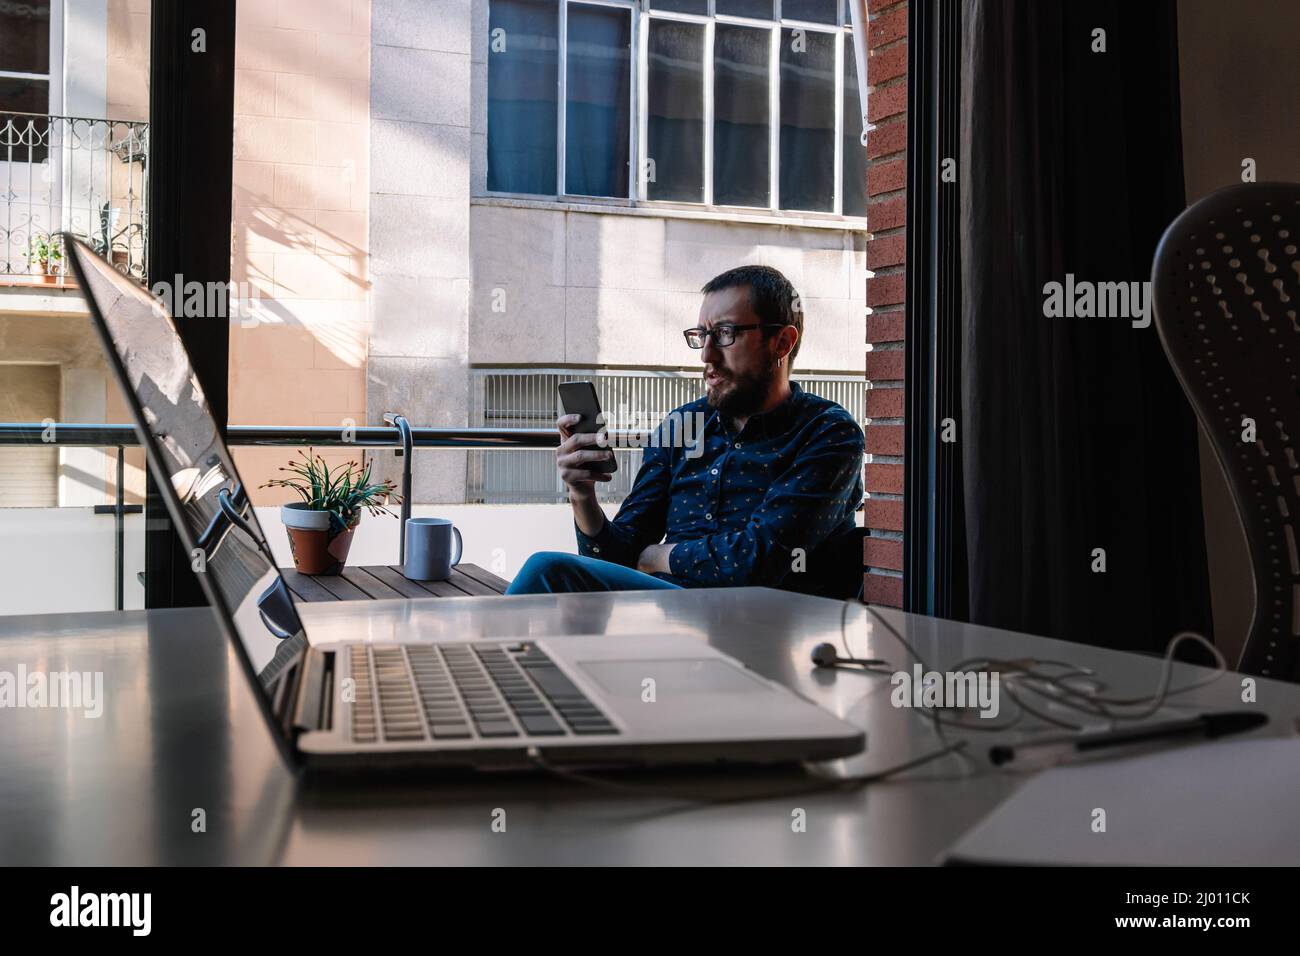 man takes a break from teleworking by looking at his smartphone Stock Photo